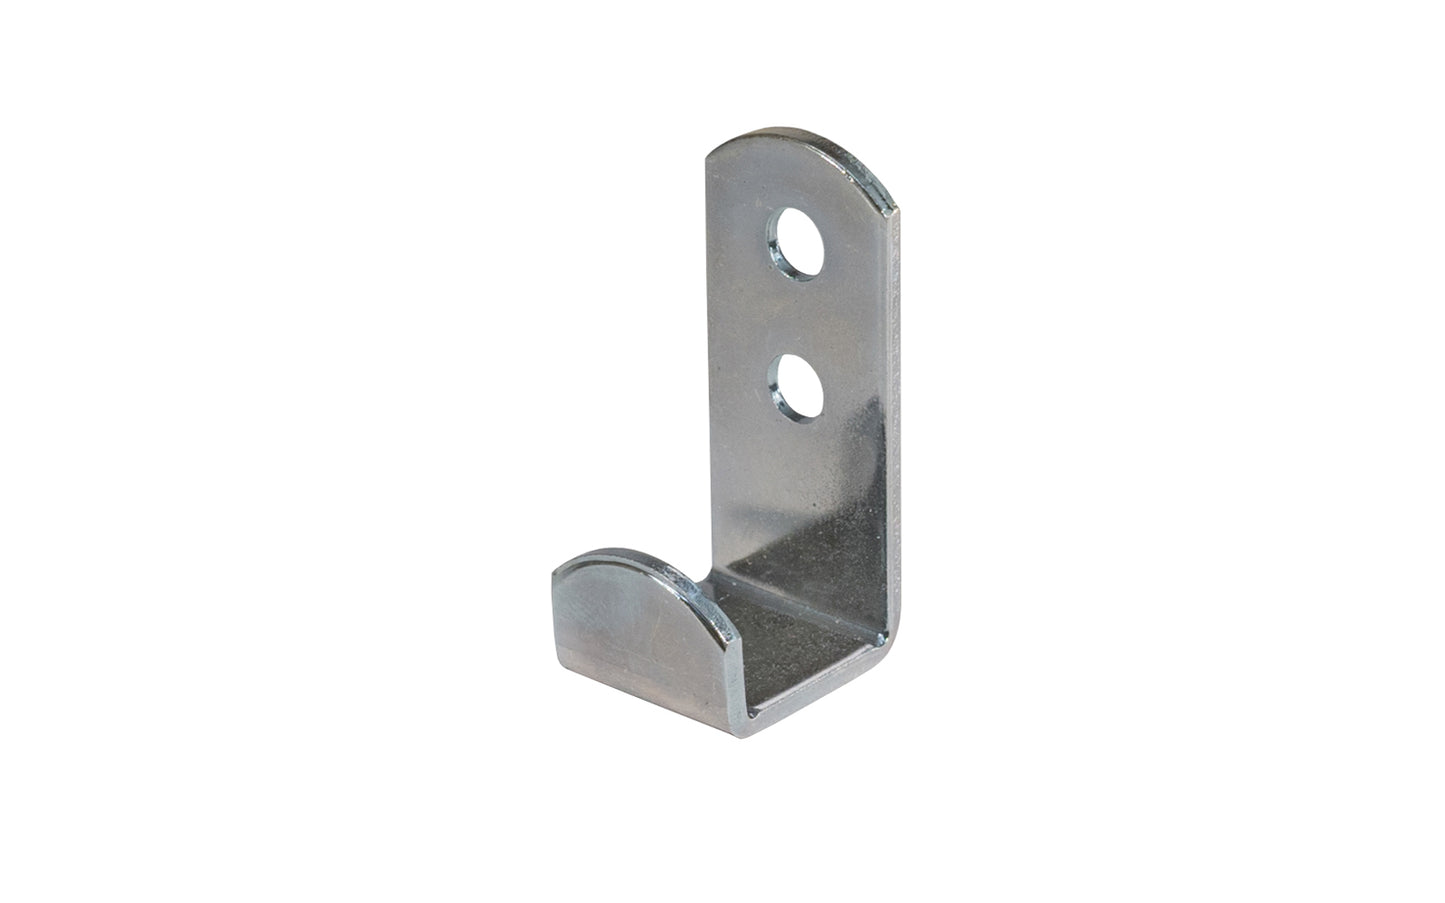 Steel Mirror Clip Support Hanger Bracket - 1/2" Opening ~ KV Model No. 313-1/2-ANO - Commonly used with installation of mirrors, but may also be used in appliacations where a 1/2" opening is needed - Knape and Vogt